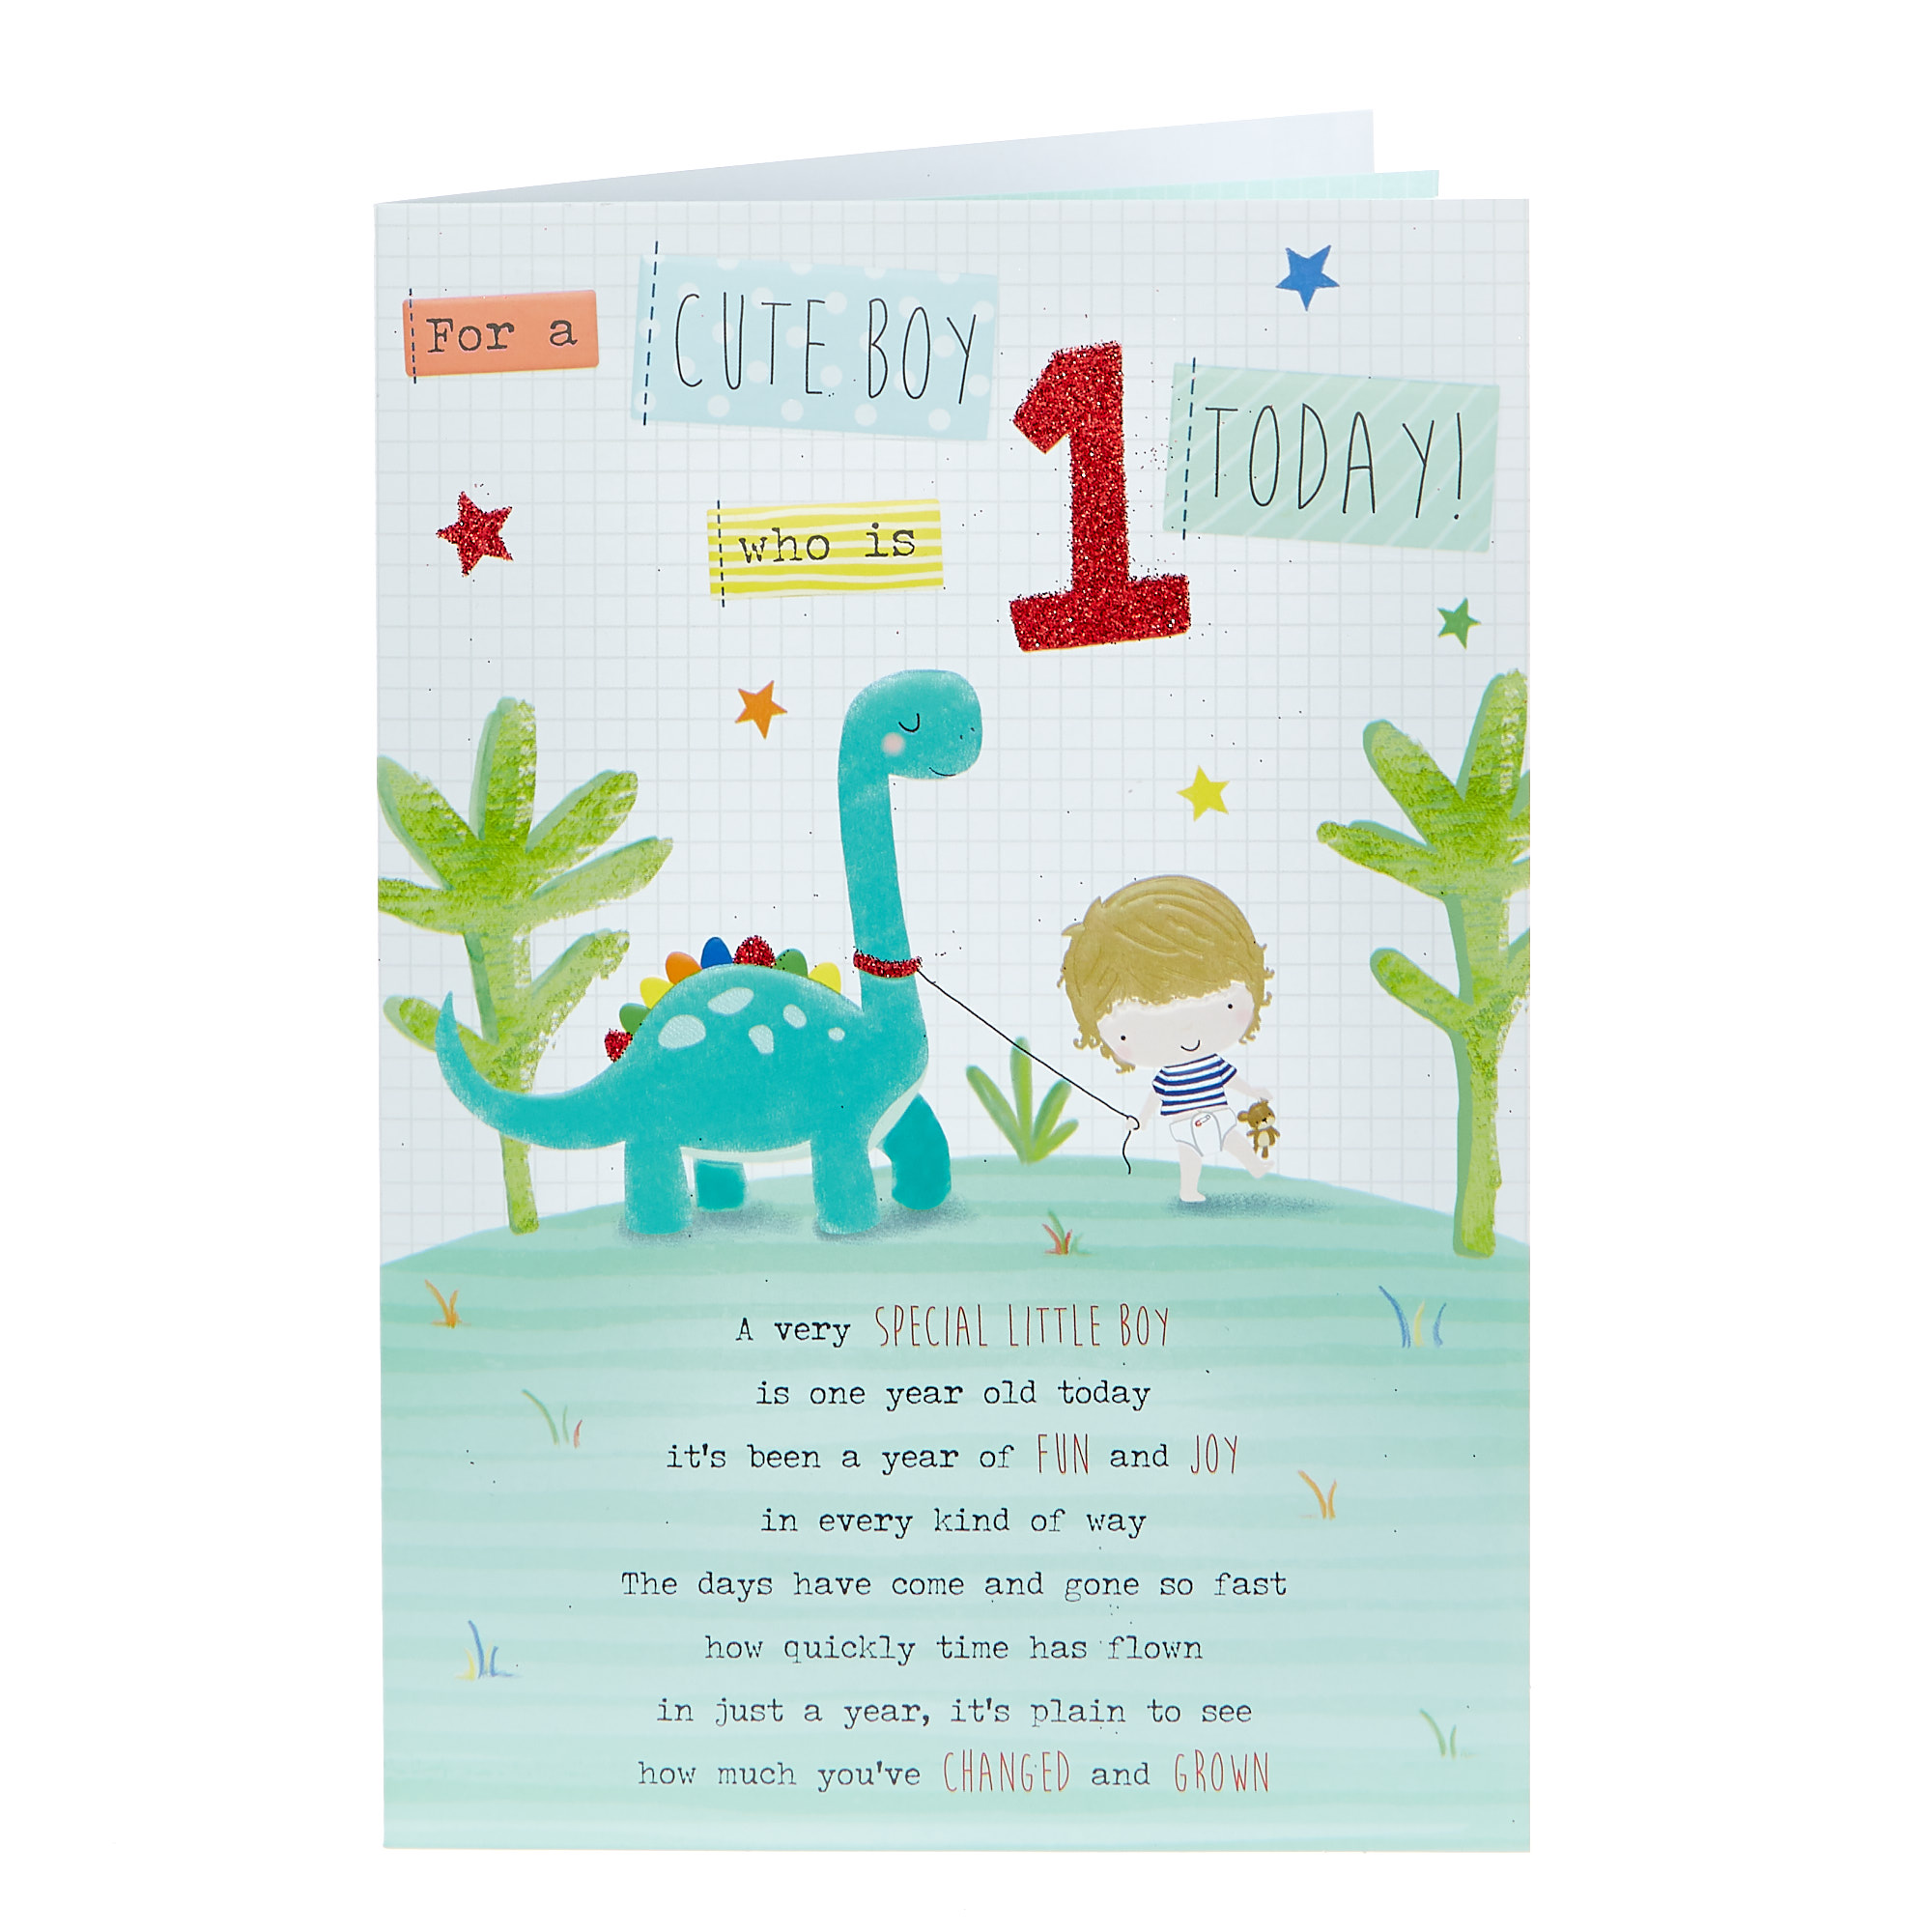 buy-1st-birthday-card-for-a-cute-boy-for-gbp-0-99-card-factory-uk